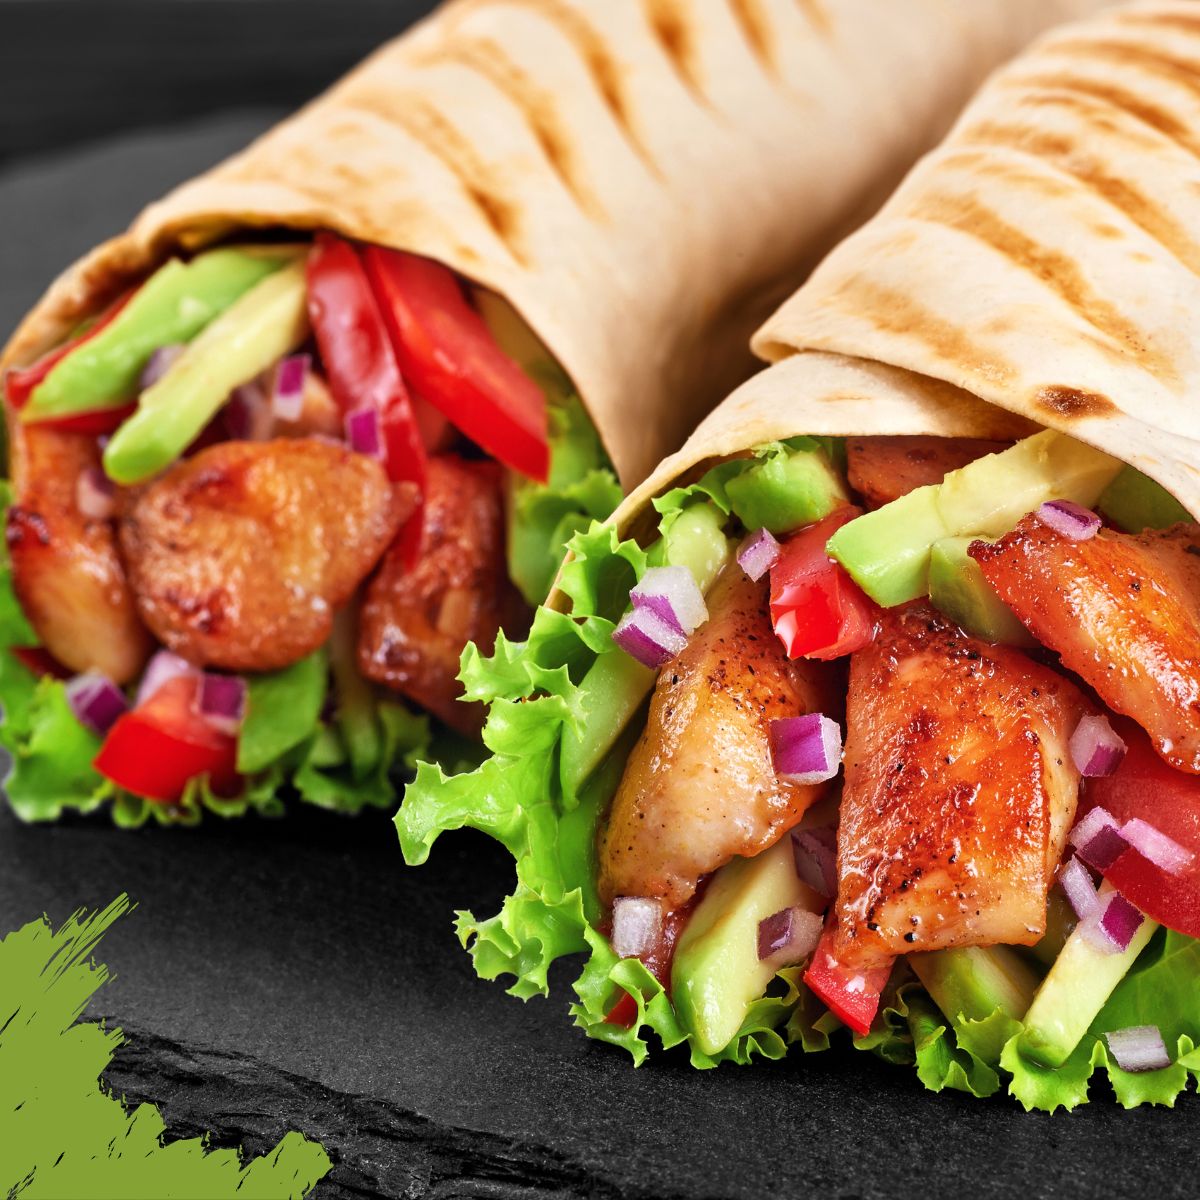 Two grilled chicken wraps with lettuce